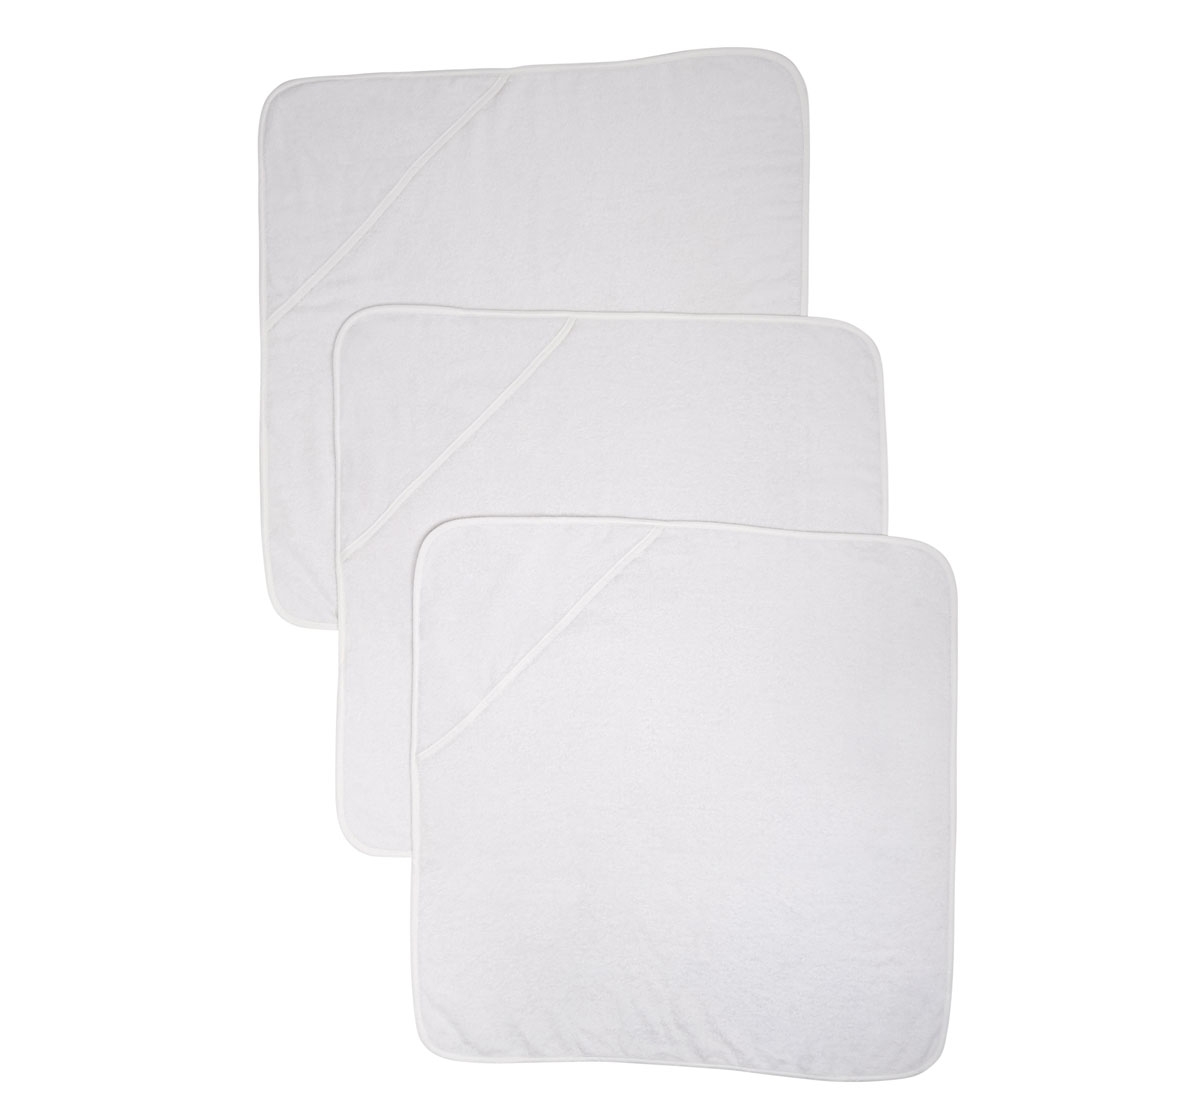 Mothercare | Cuddle 'N' Dry Hooded Towels - White - Pack of 3